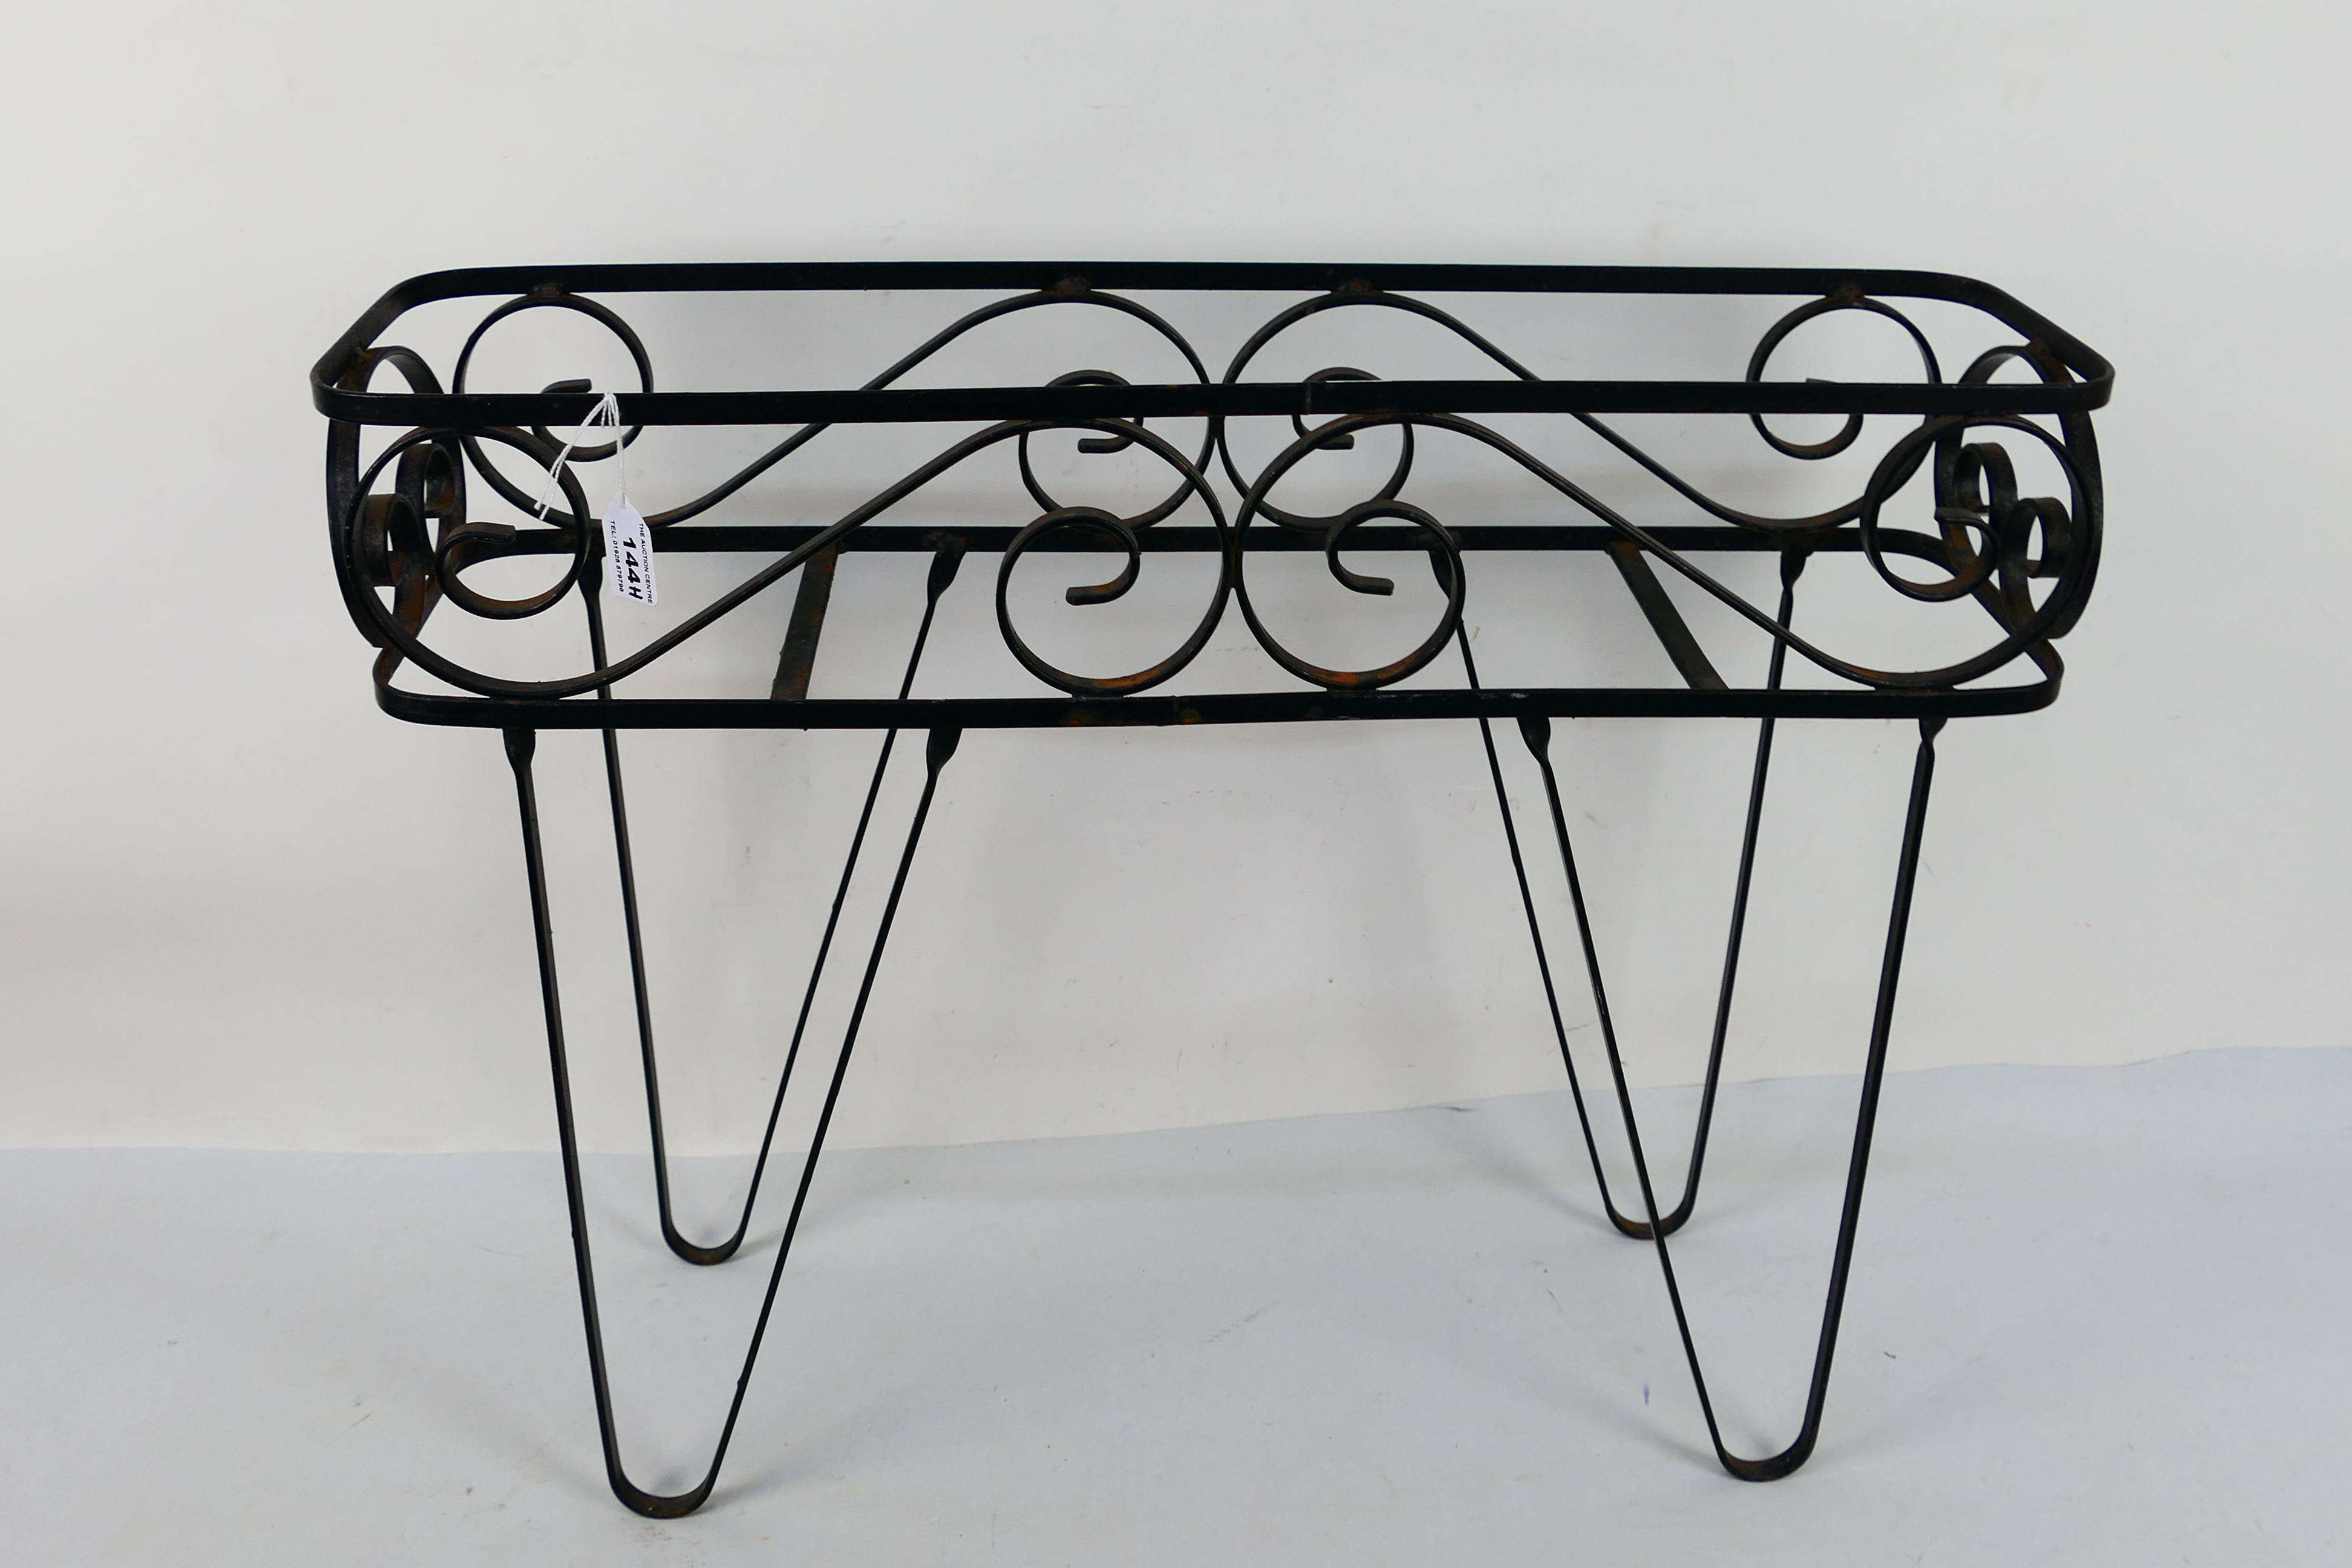 A black painted wrought iron planter stand, approximately 48 cm x 62 cm x 17 cm.